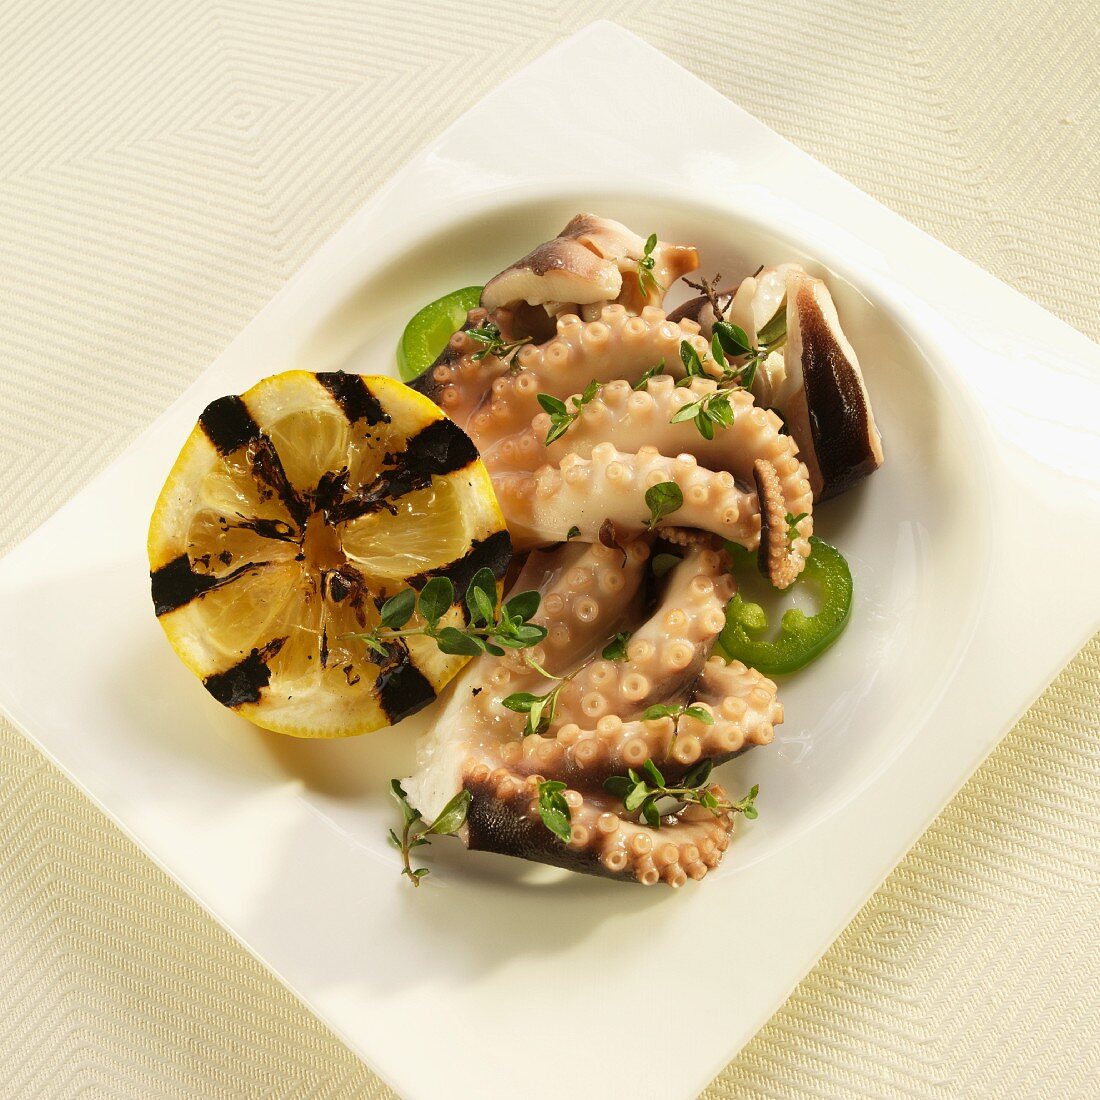 Greek Marinated Octopus with Herbs and Grilled Lemon